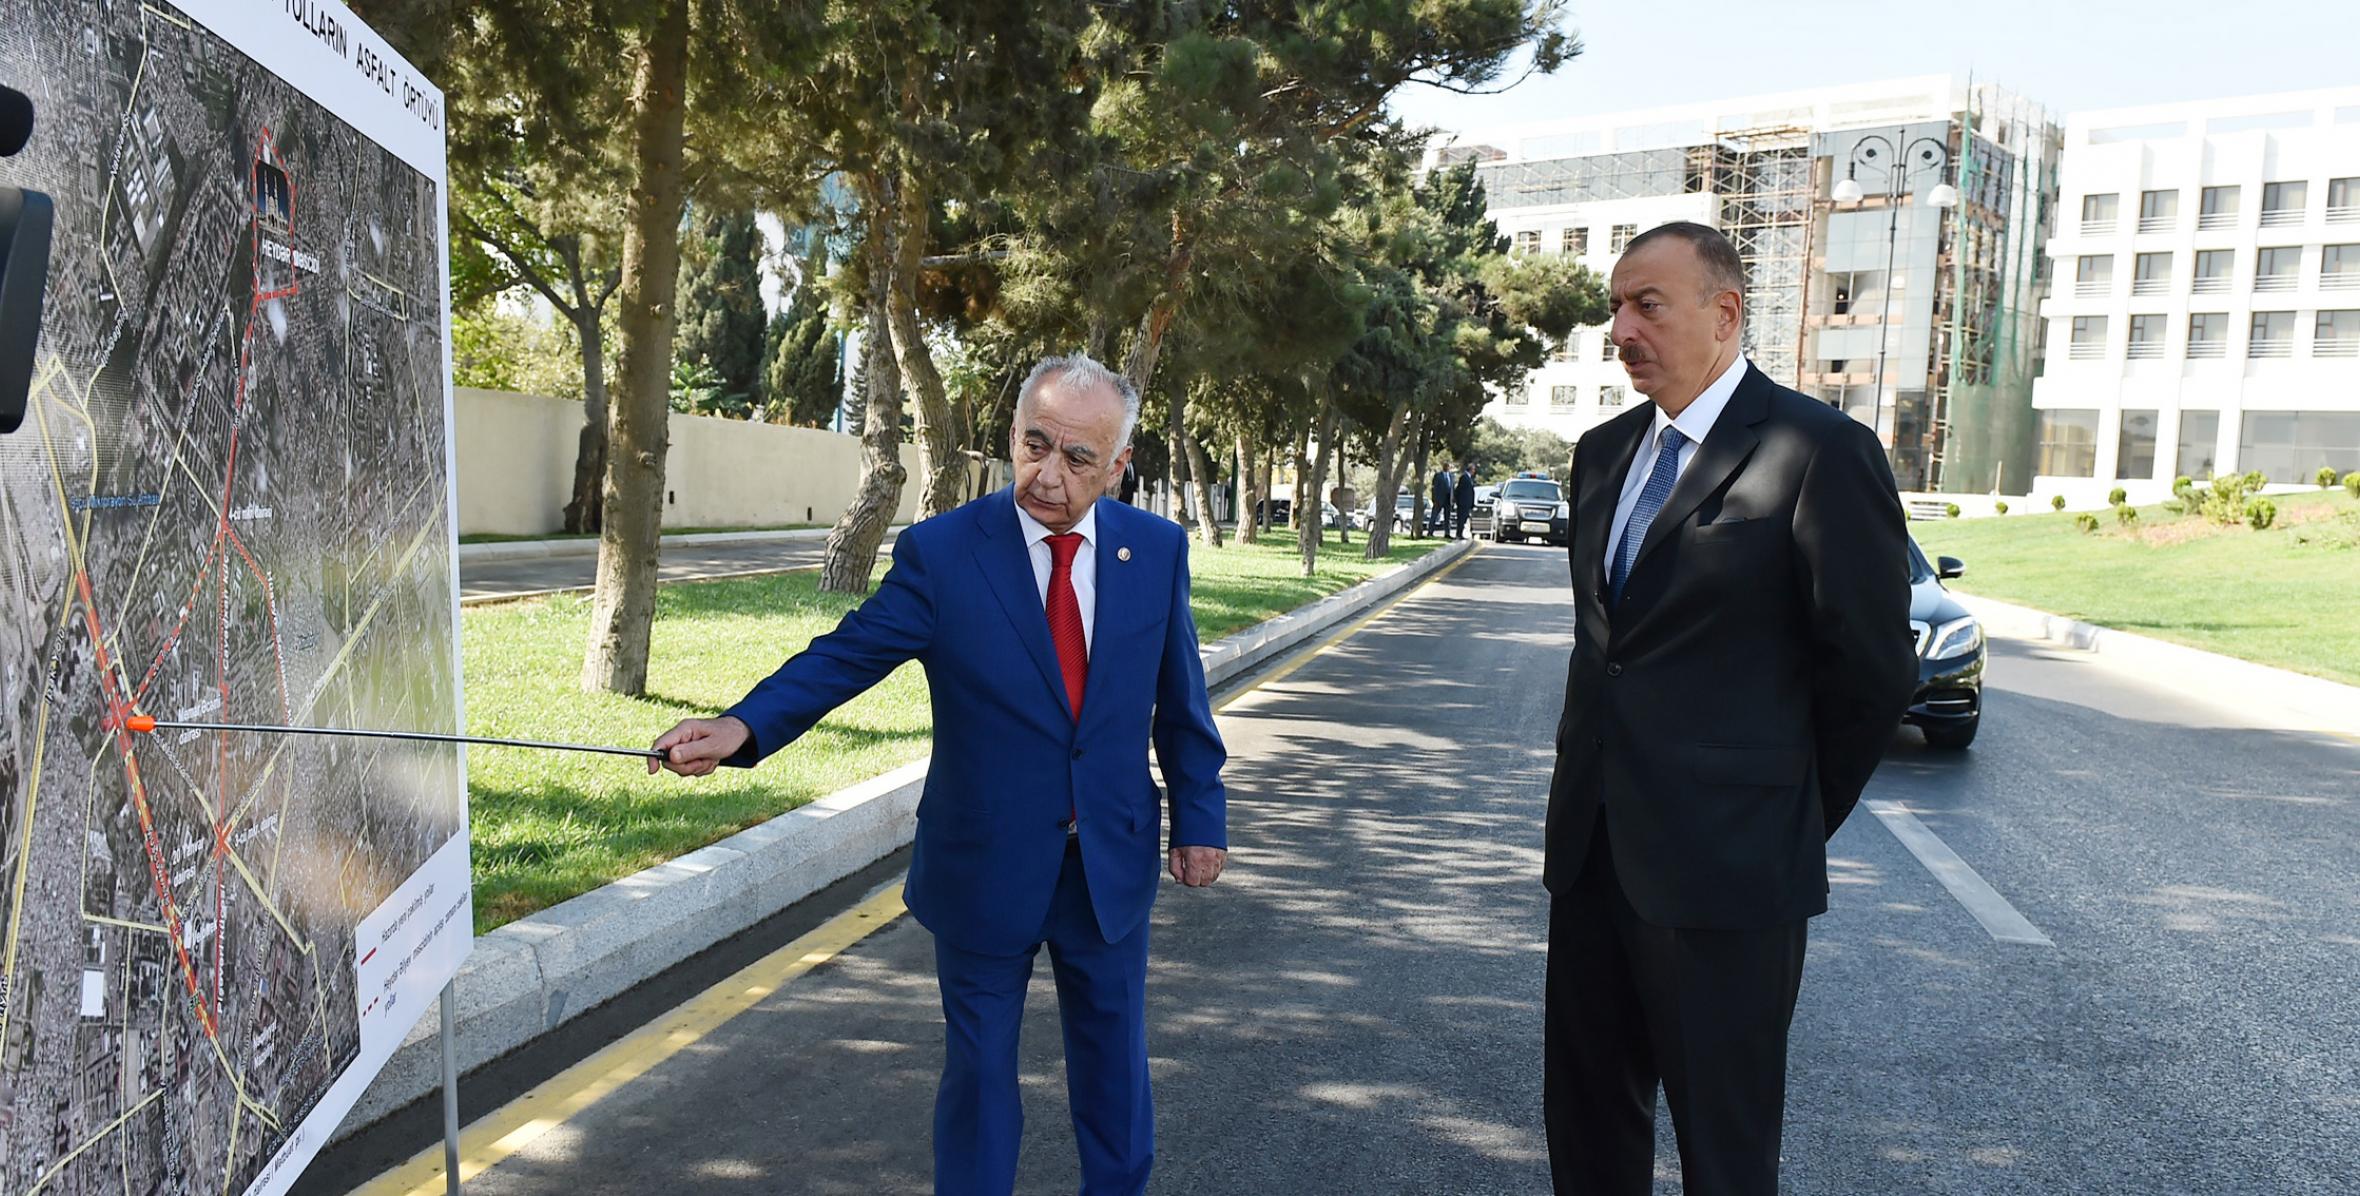 Ilham Aliyev reviewed the reconstruction work on several streets in Baku